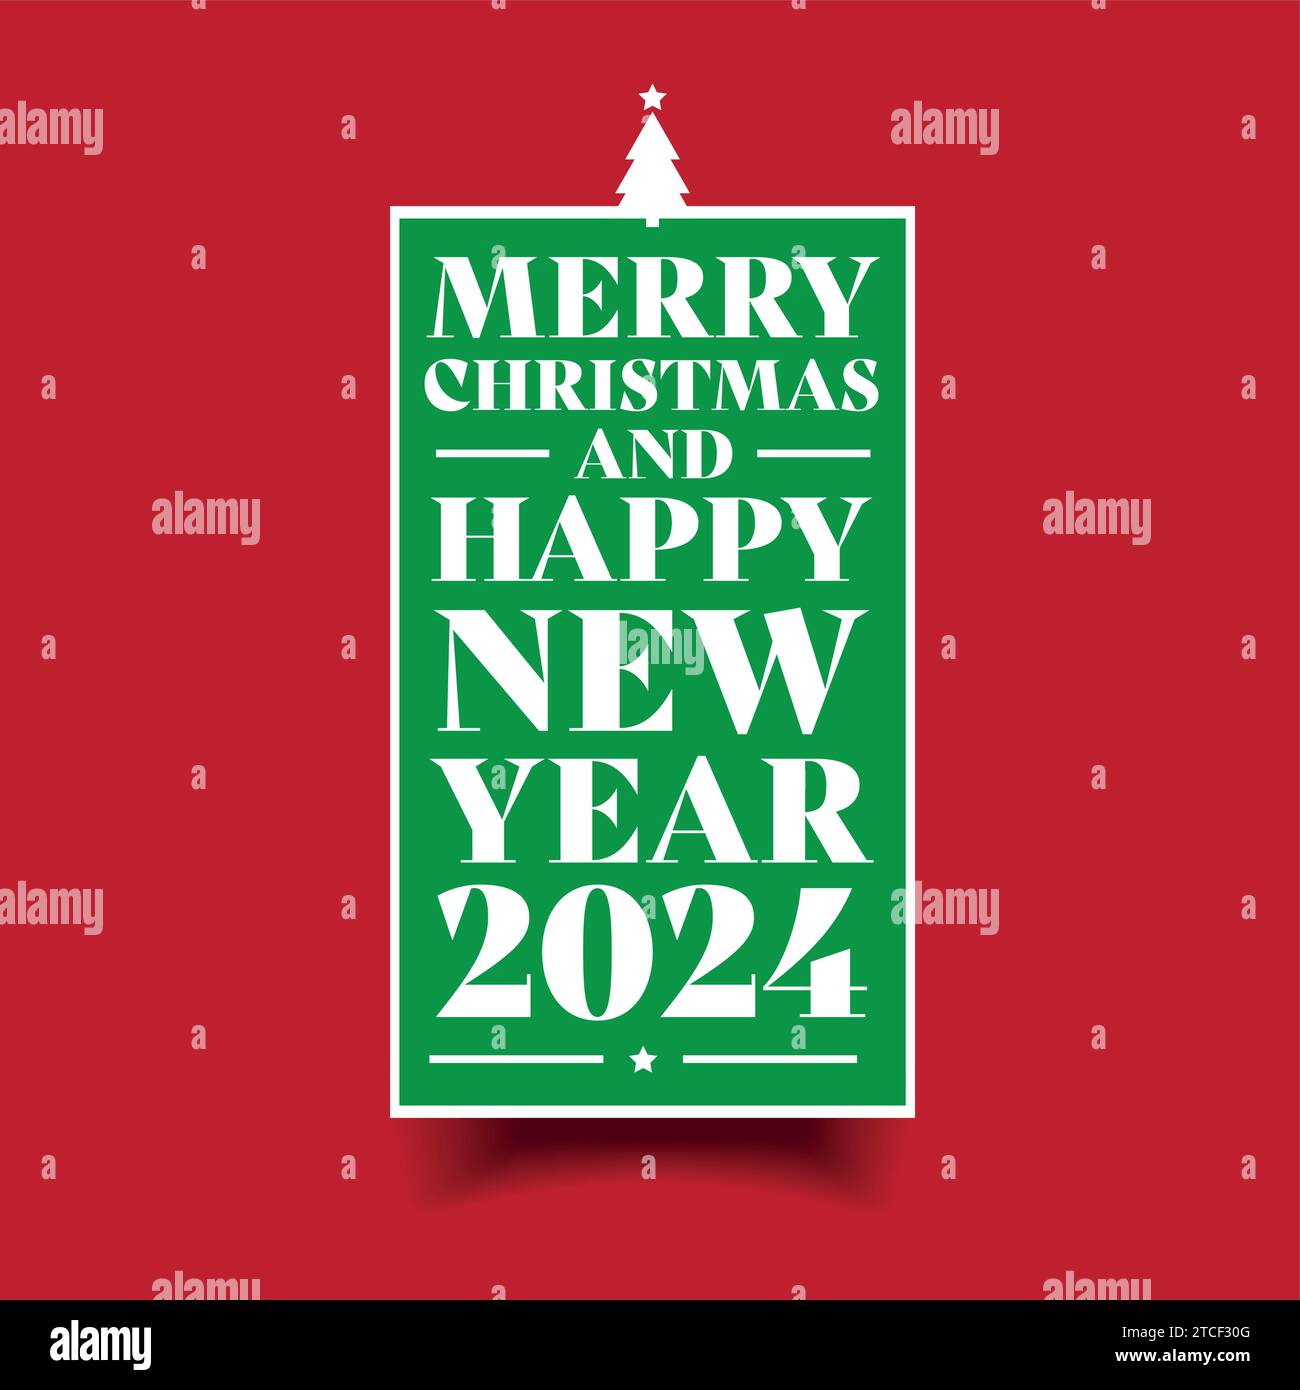 Merry Christmas and Happy New Year 2024 vector Stock Vector